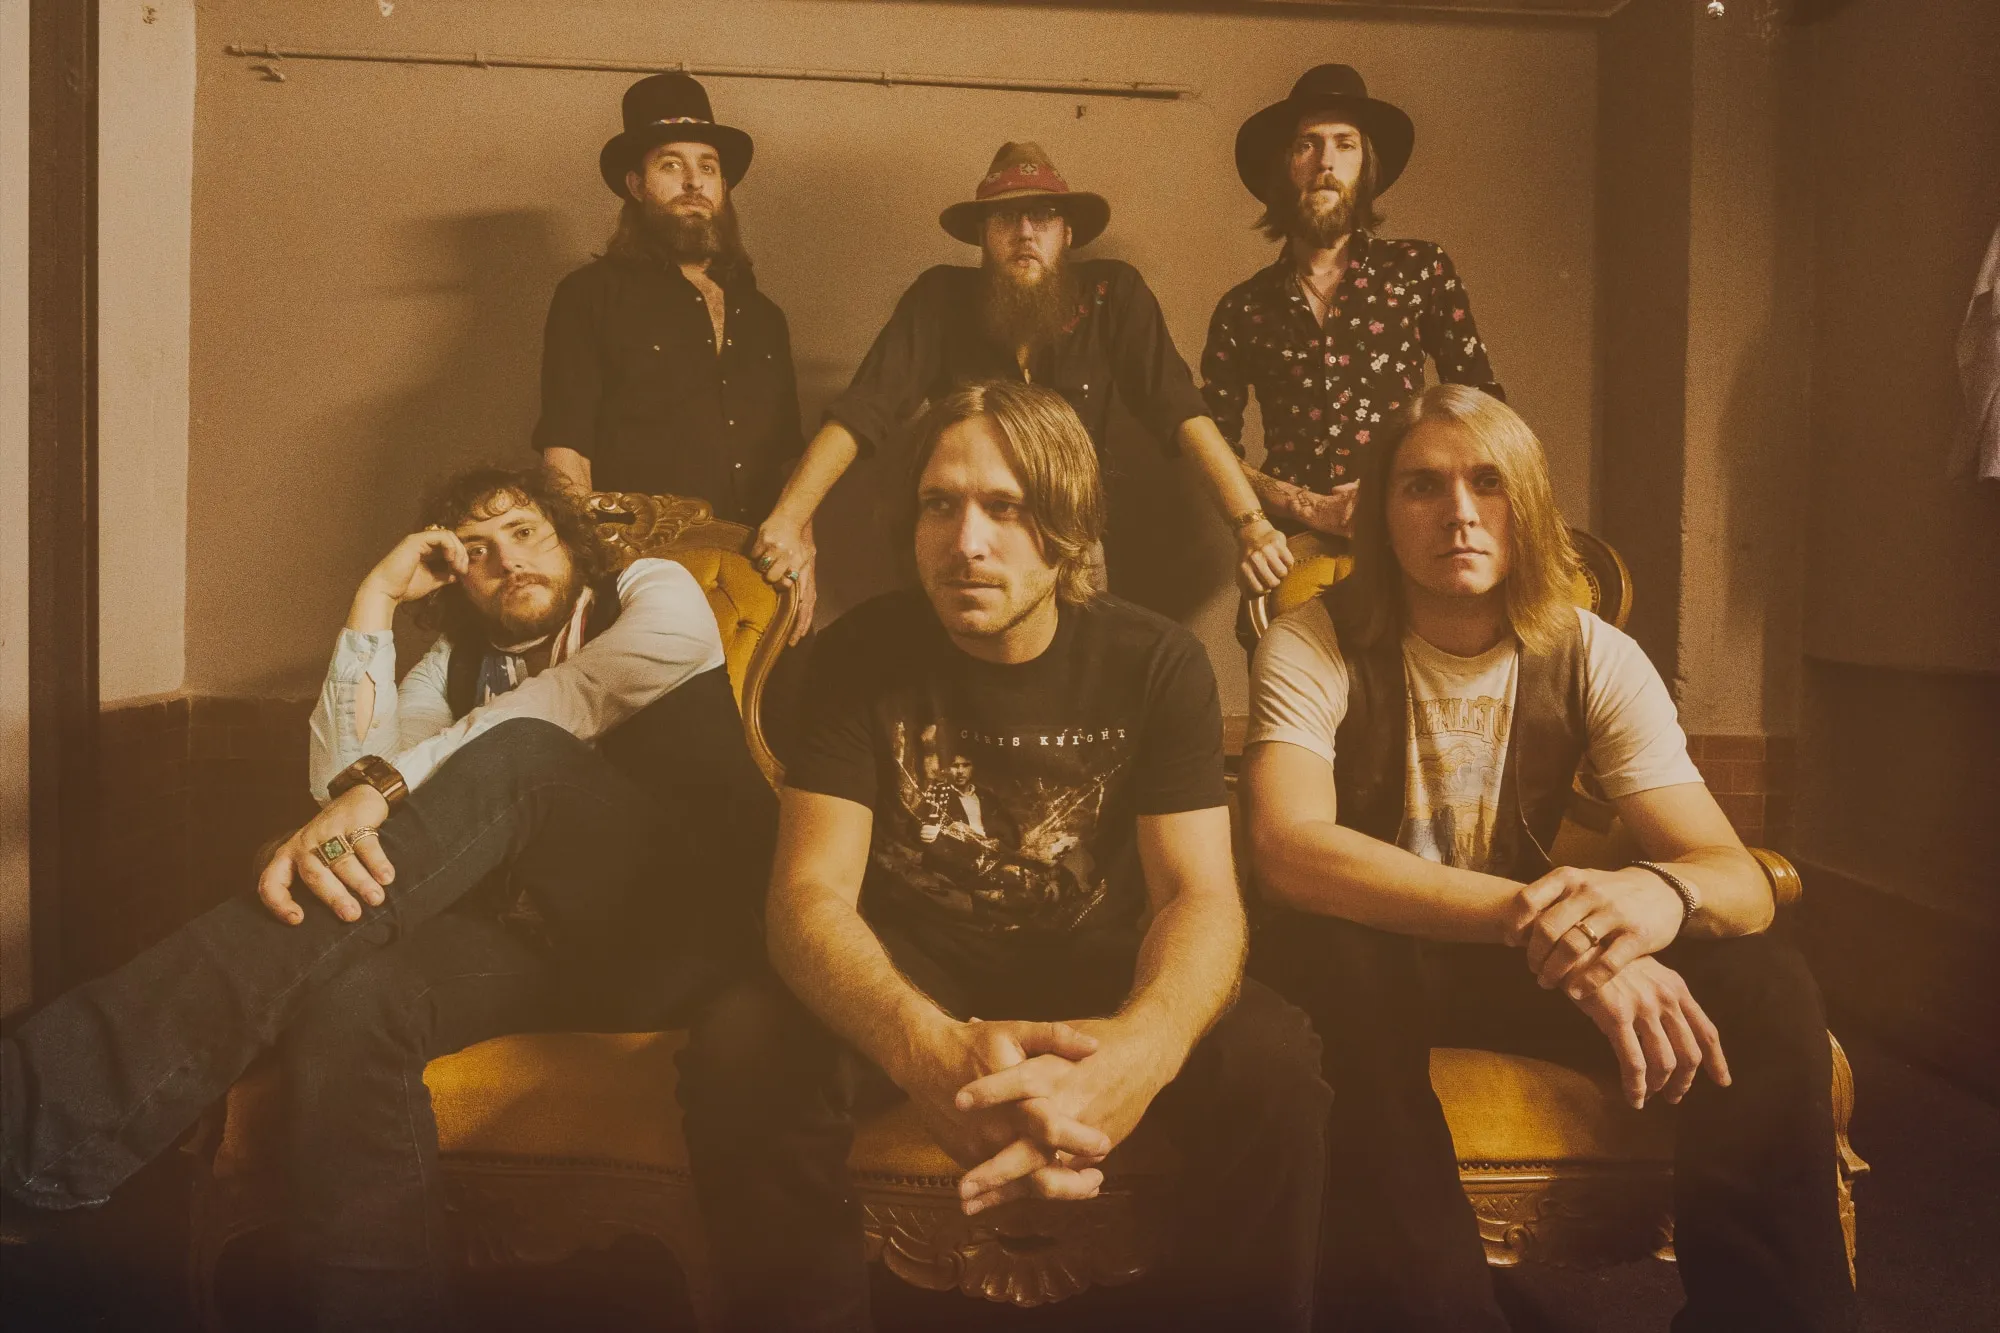 Whiskey Myers Pays Homage to the Pain of Reality on the Front Lines in Music Video for “Bury My Bones”